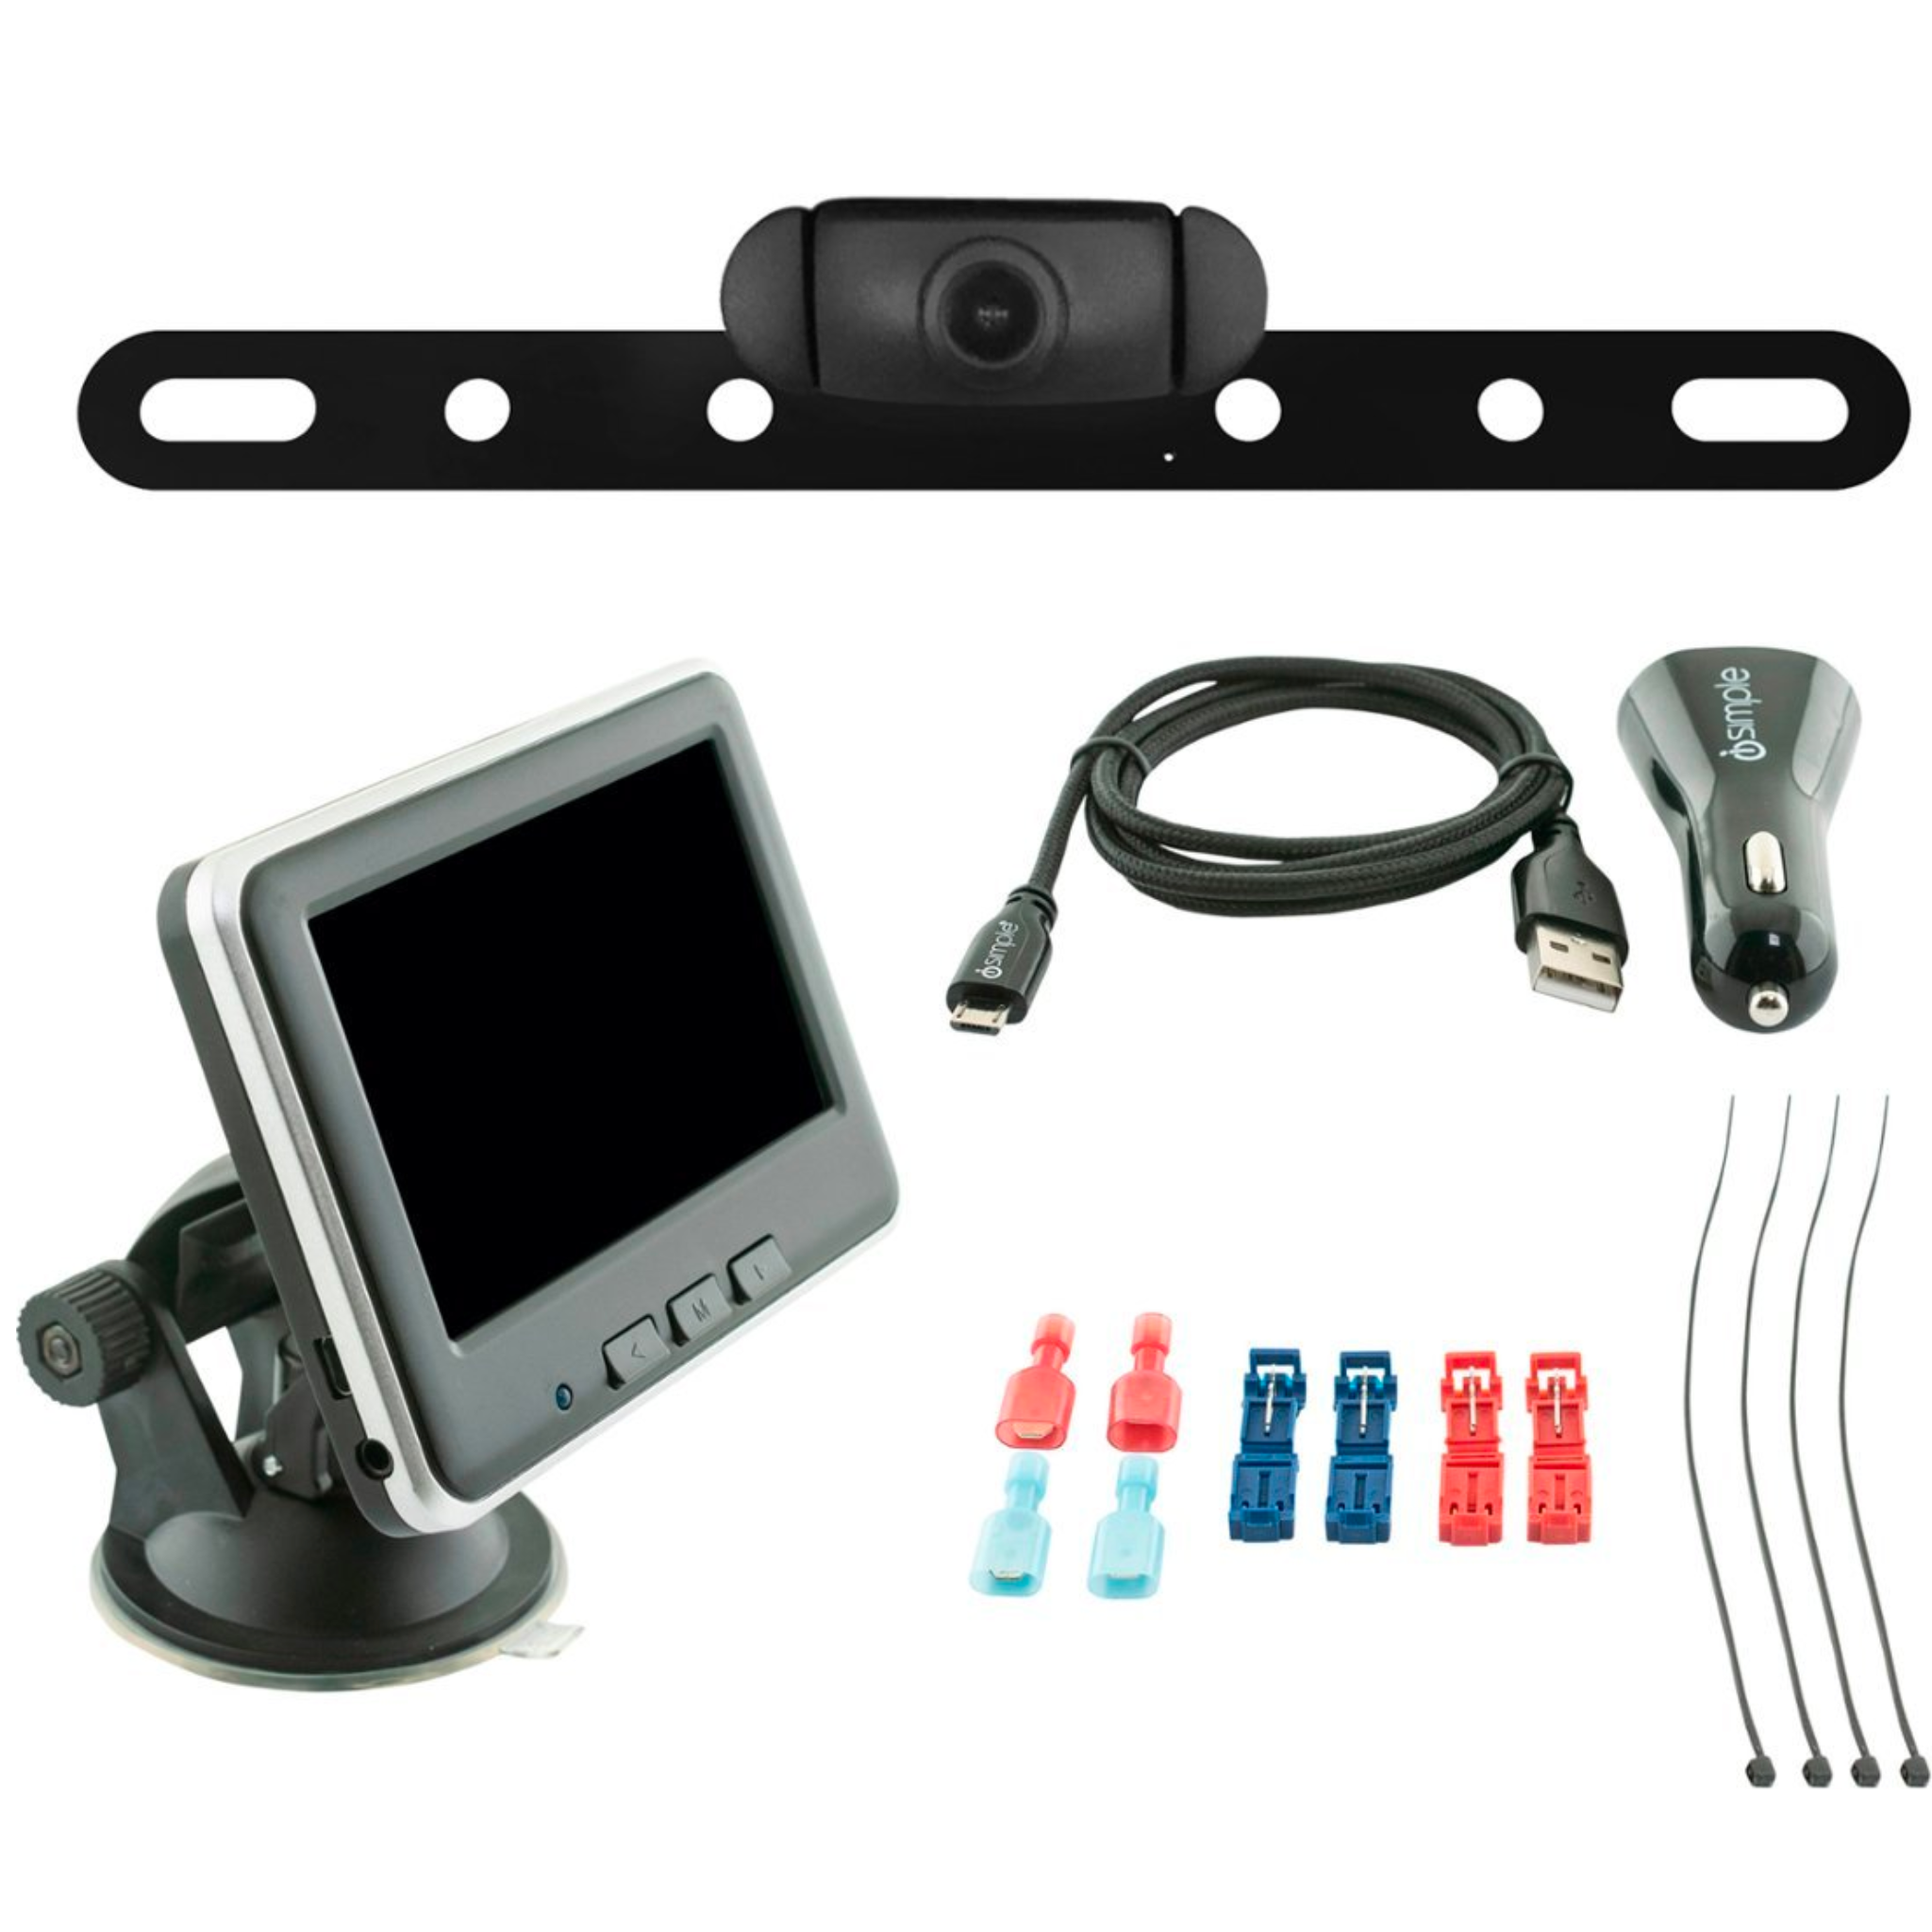 Wireless Backup Camera Kit with 4.3" Color Monitor